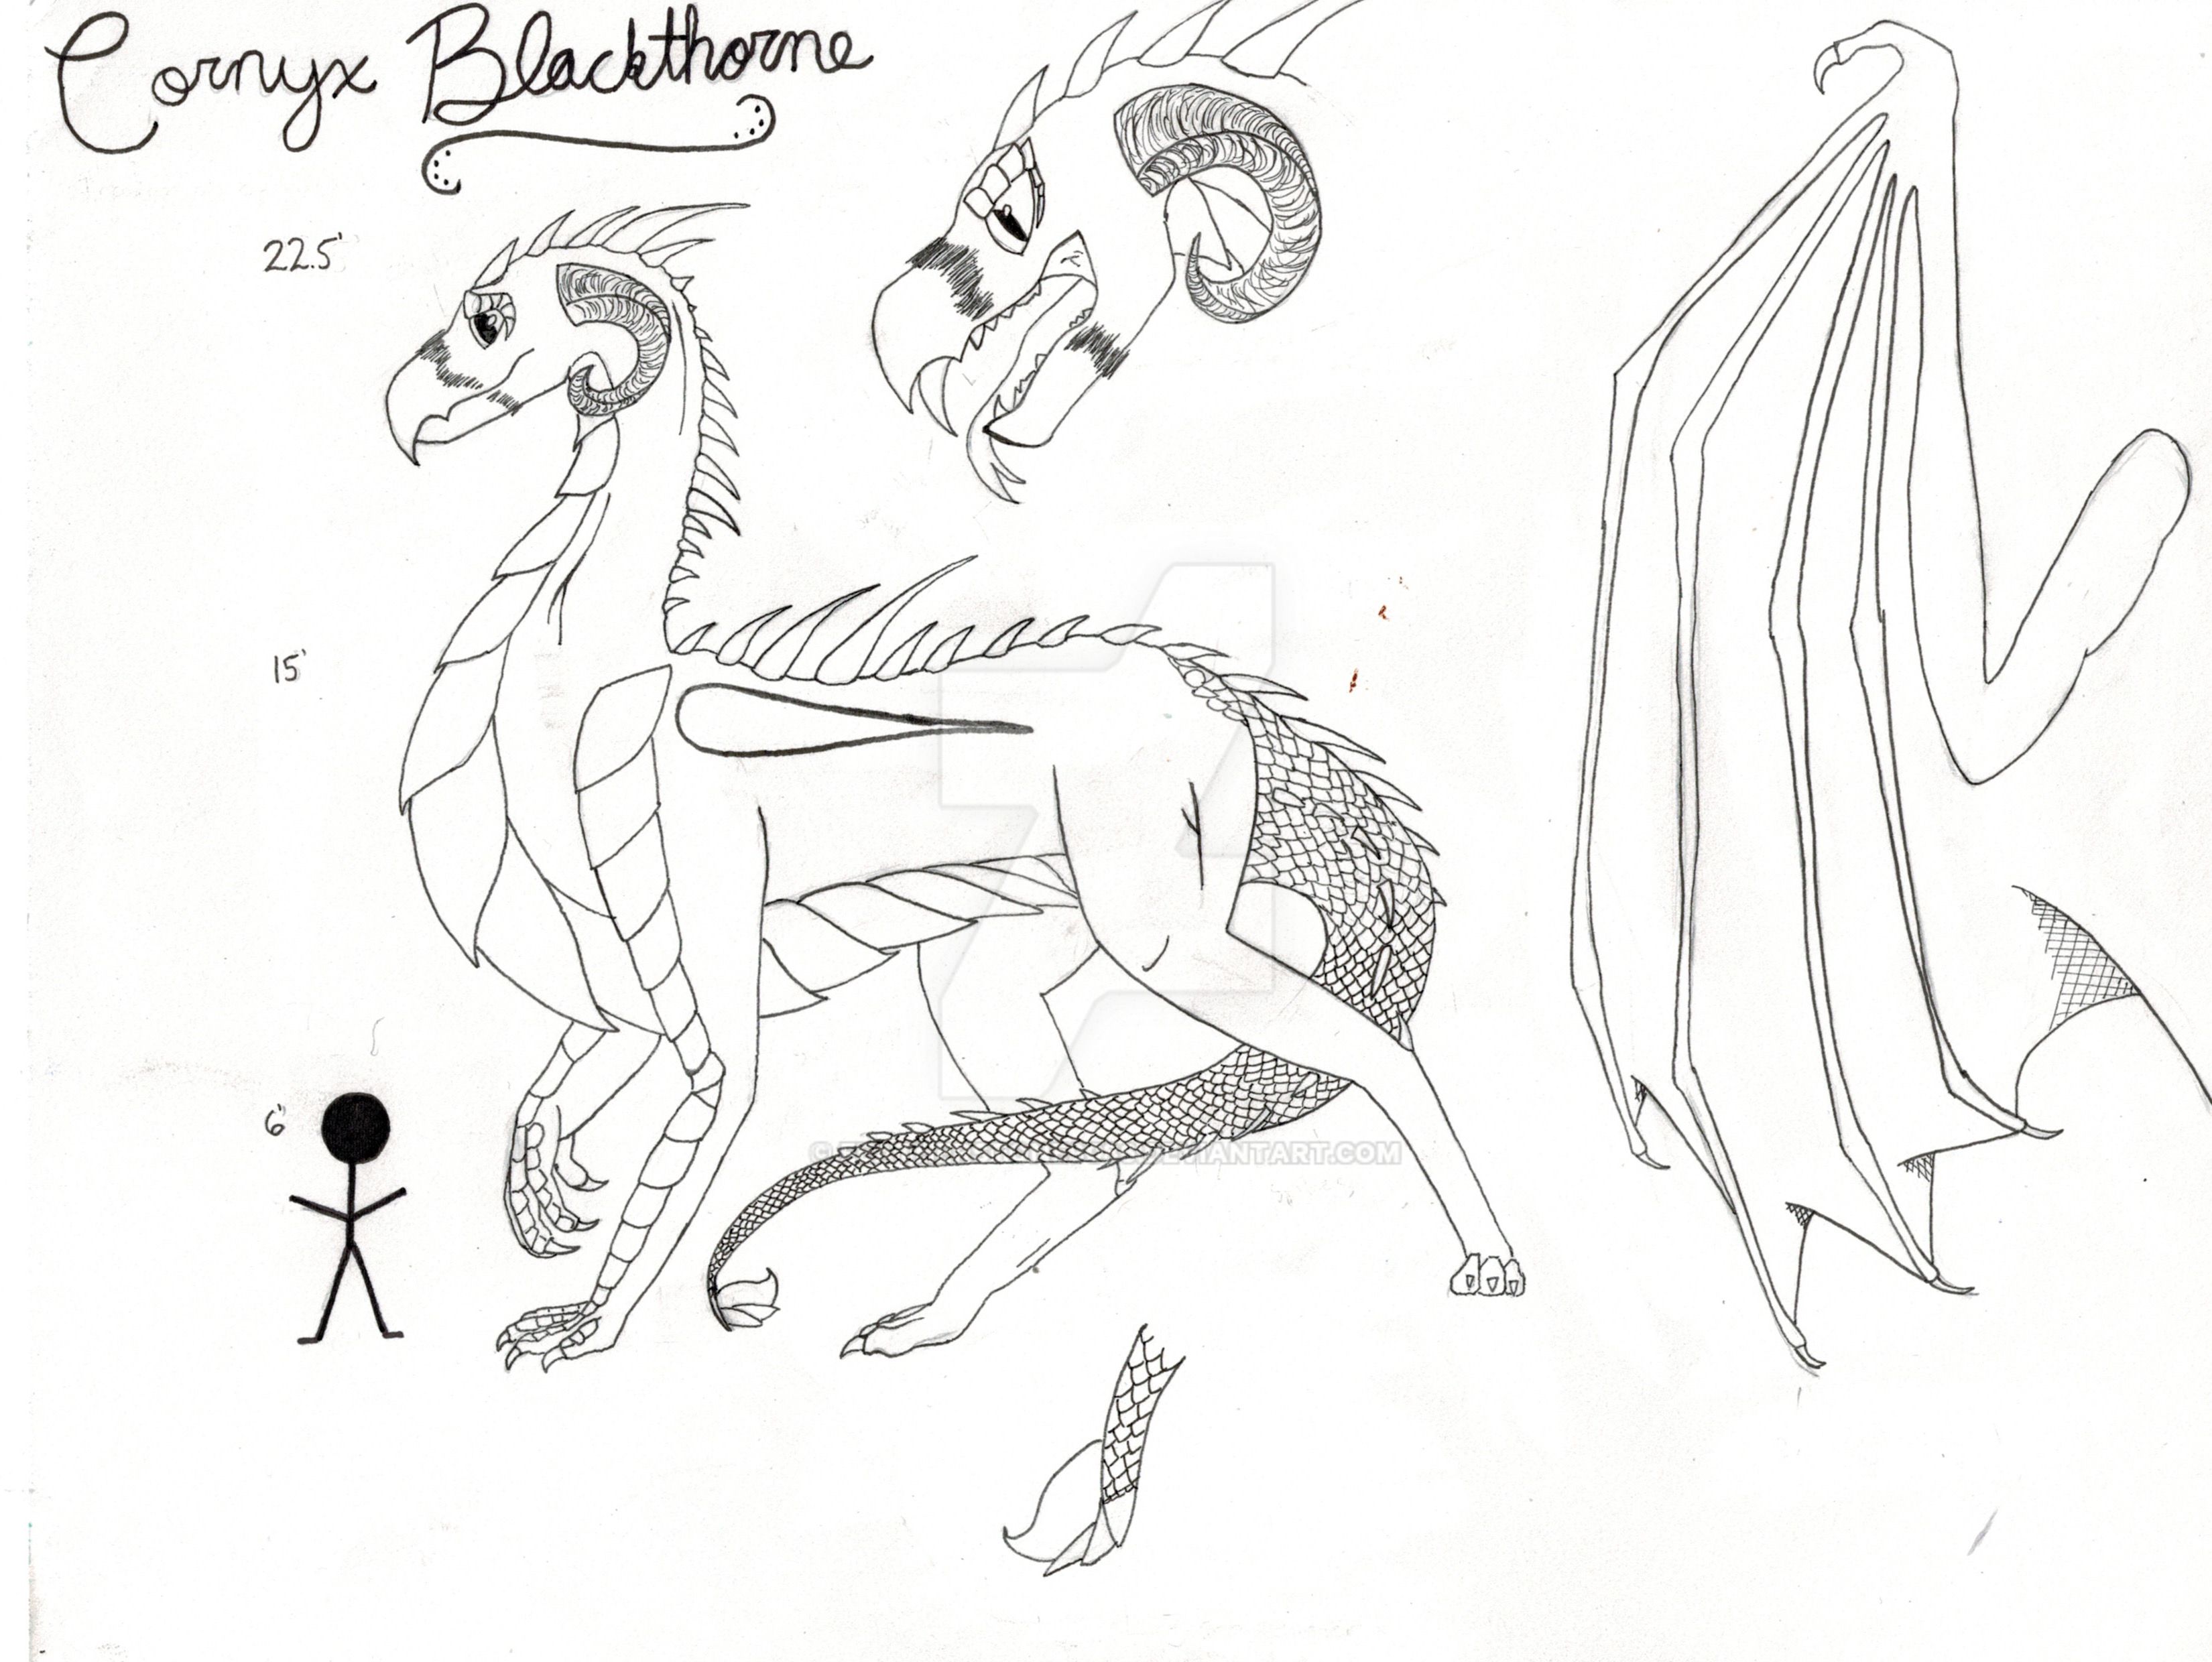 cornyxblackthorndragonformlinedrawing_by_featherstone9086-dcz6g8e.jpg